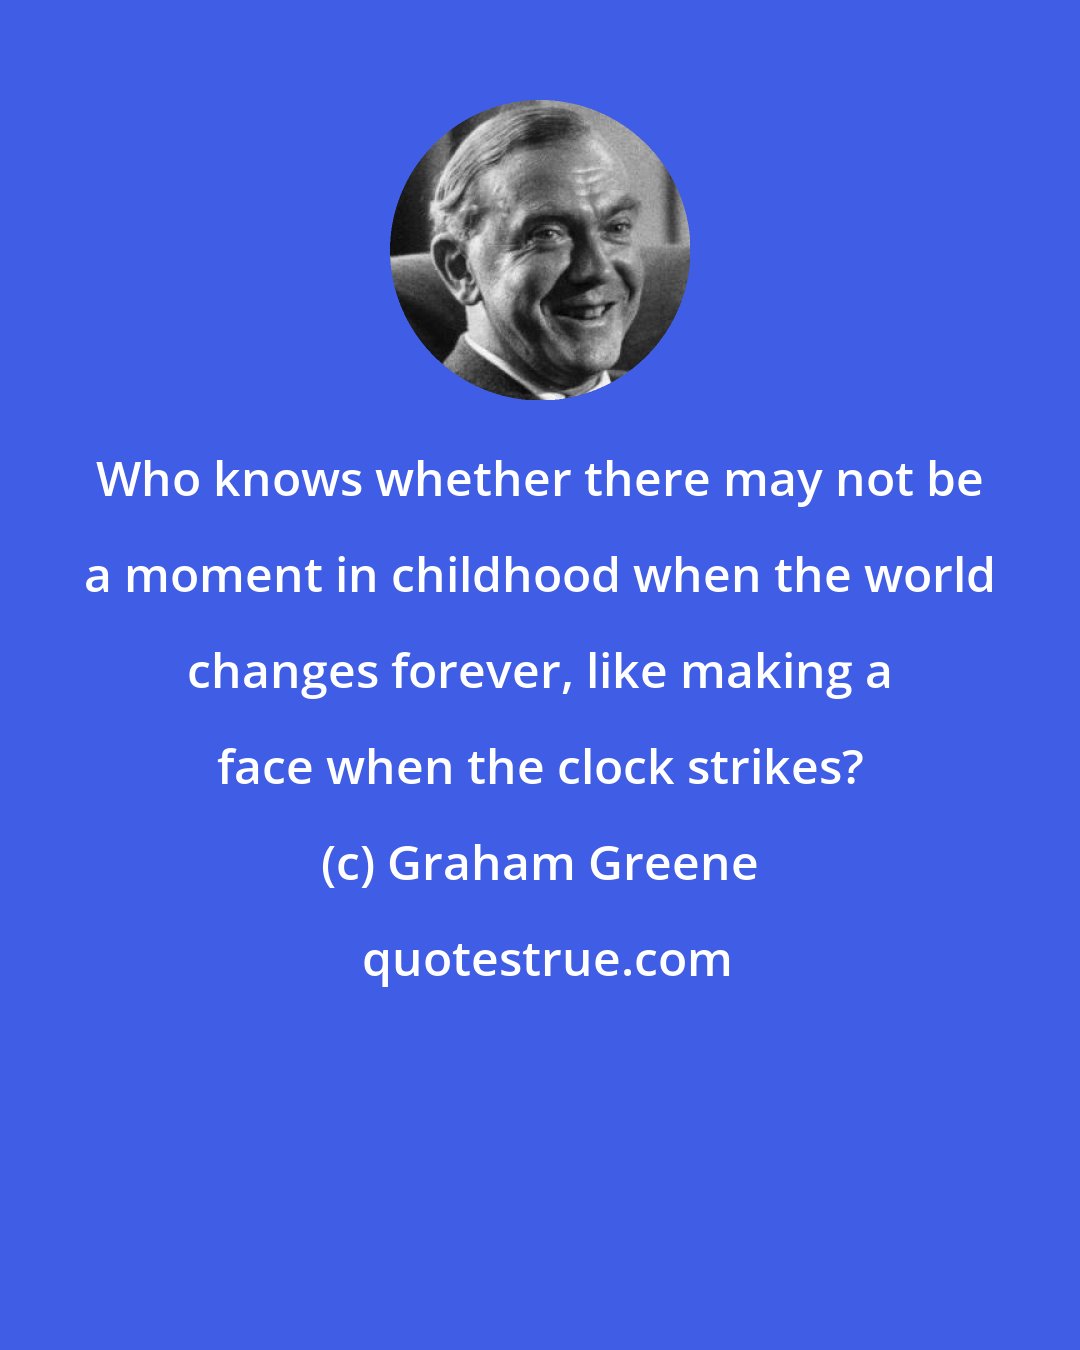 Graham Greene: Who knows whether there may not be a moment in childhood when the world changes forever, like making a face when the clock strikes?